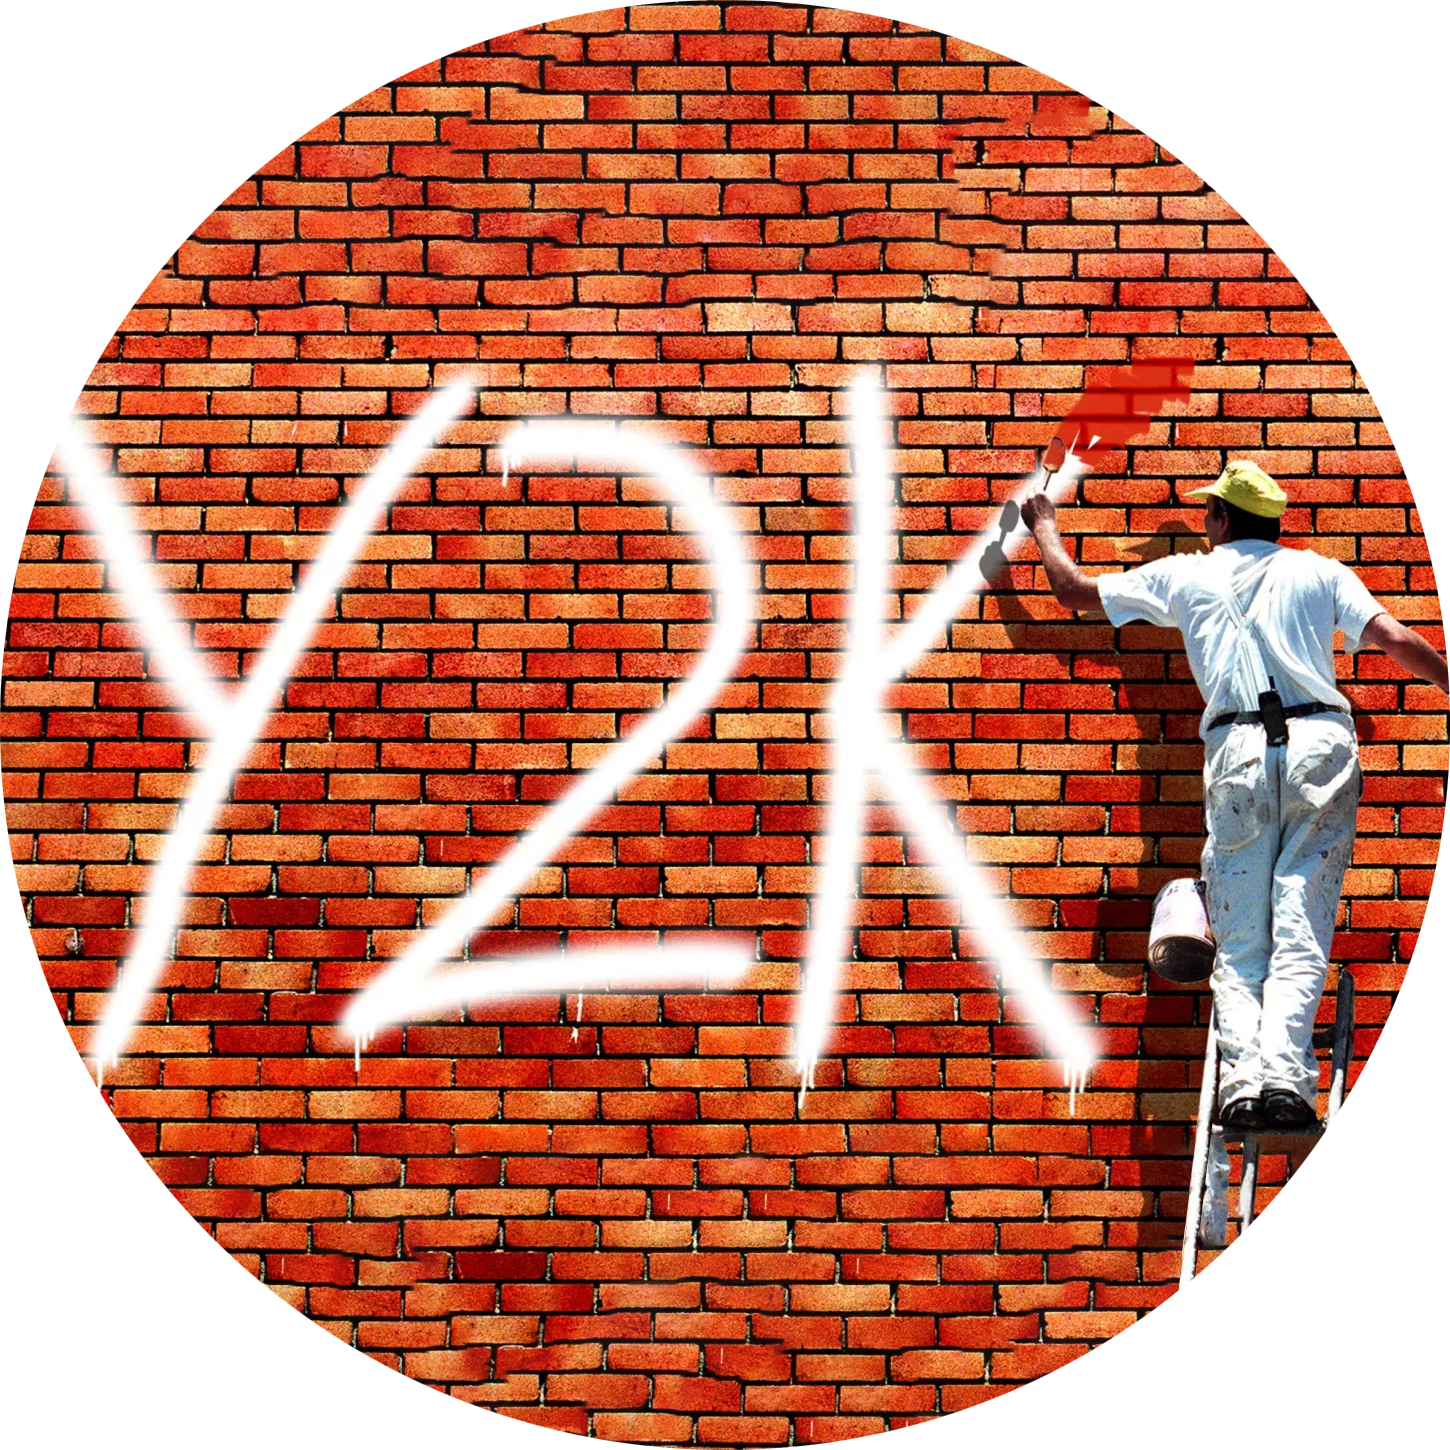 A brickwall with graffiti written Y2K being painted over by a man